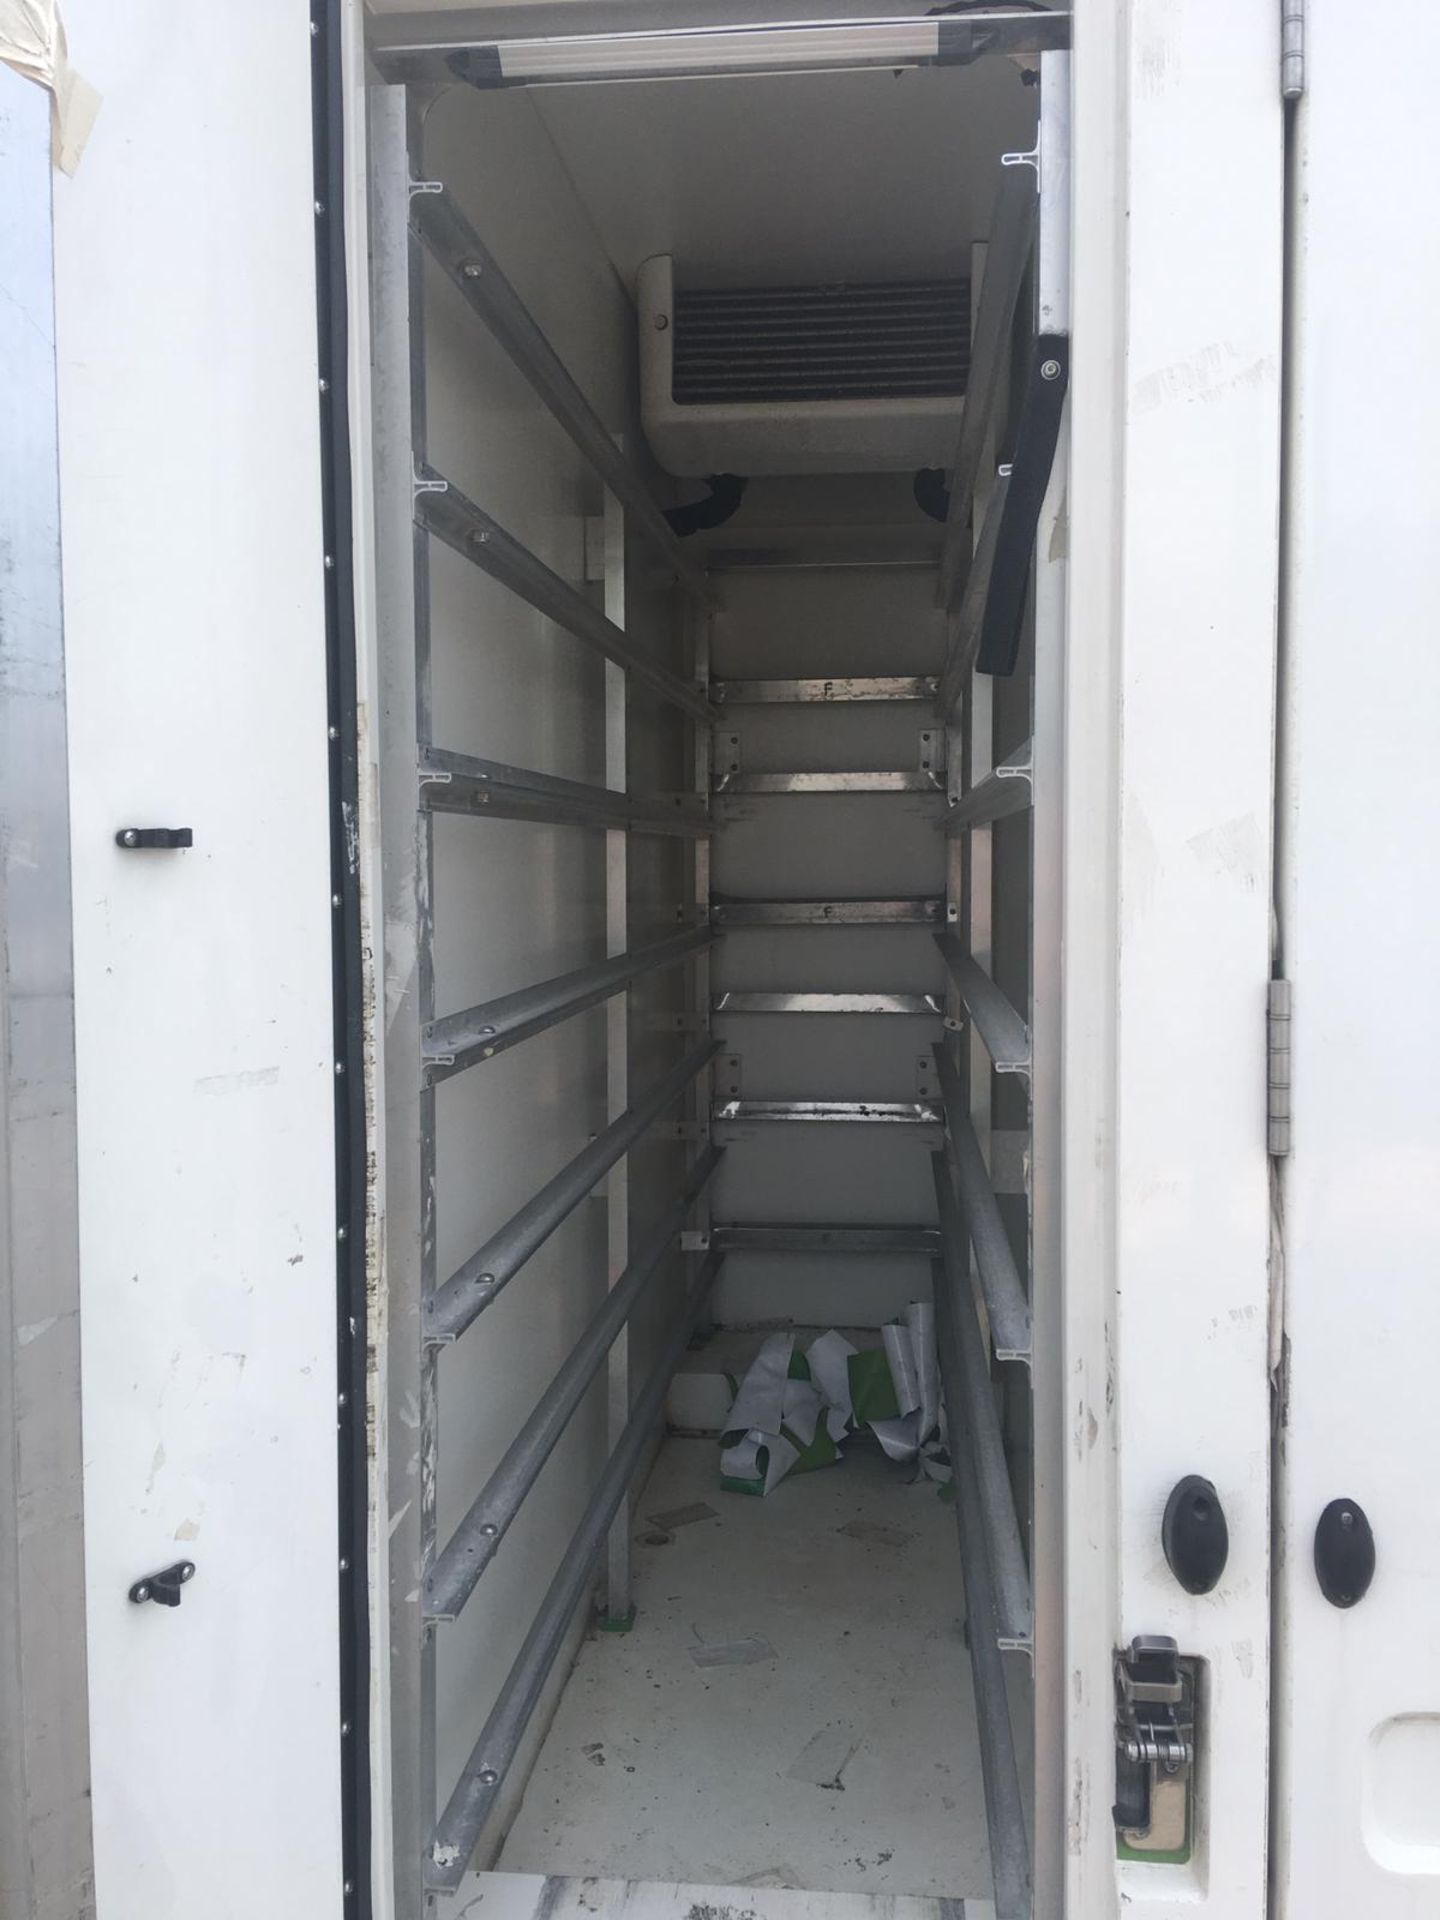 EX SUPERMARKET GAH REFRIGERATION REAR BOX UNIT, ROLLER SHUTTER DOOR, YOU'RE BIDDING FOR THE BOX ONLY - Image 9 of 10